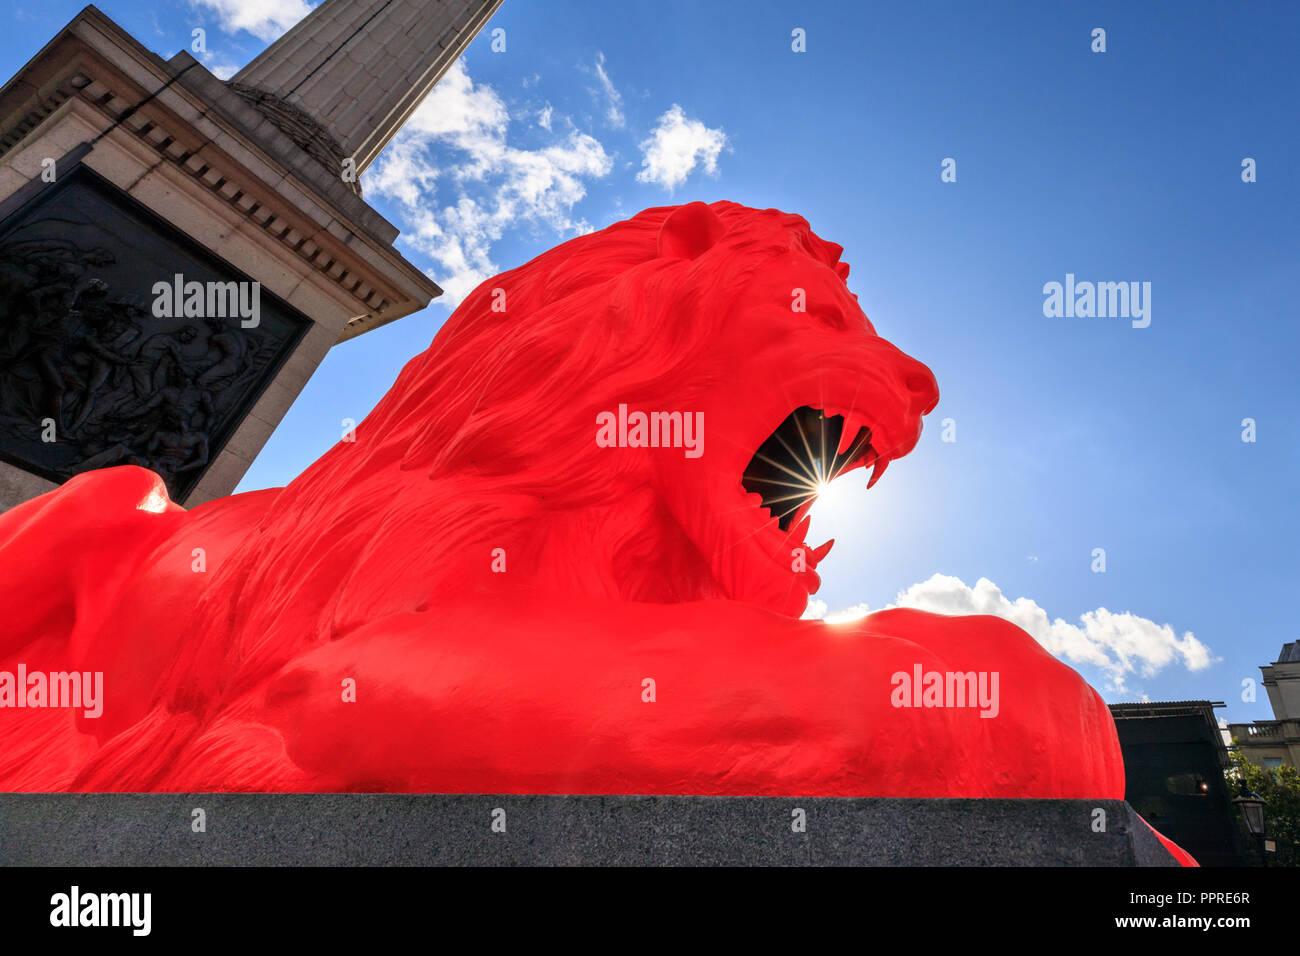 Please feed the Lions, red flurescent lion art installation by Es Devlin on Trafalgar Square, London, UK Stock Photo